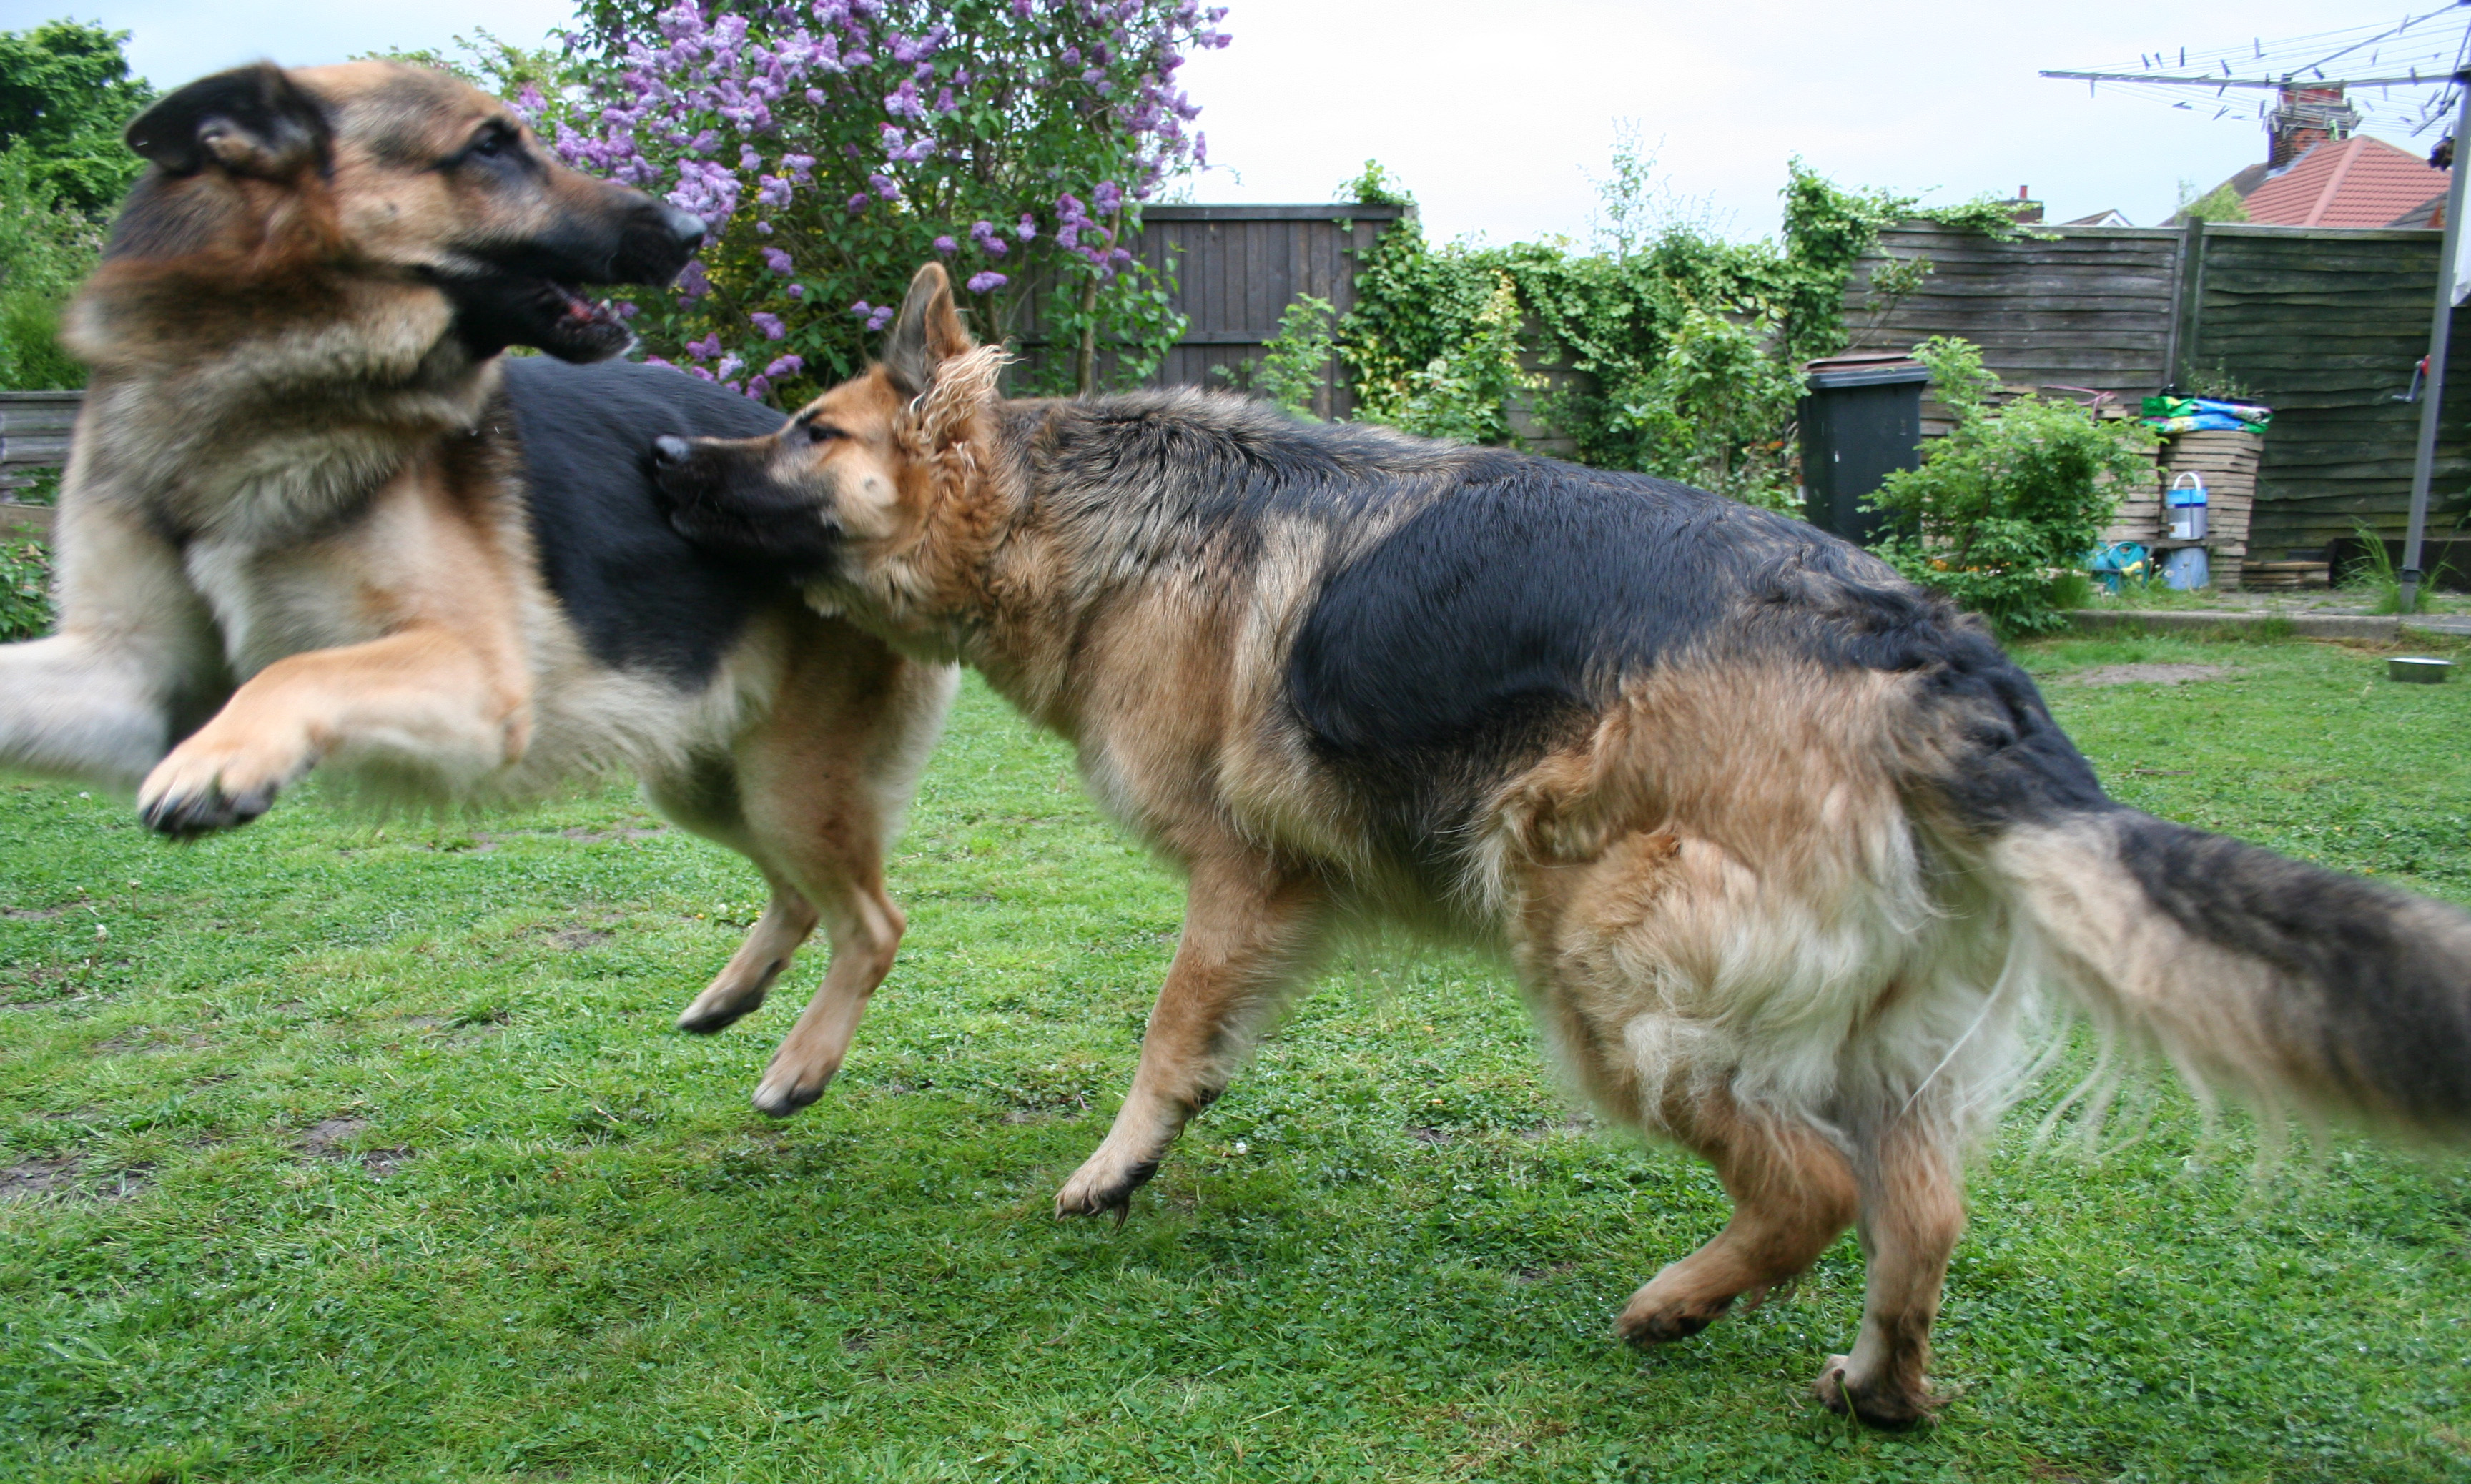 Ace and Hazel play fighting